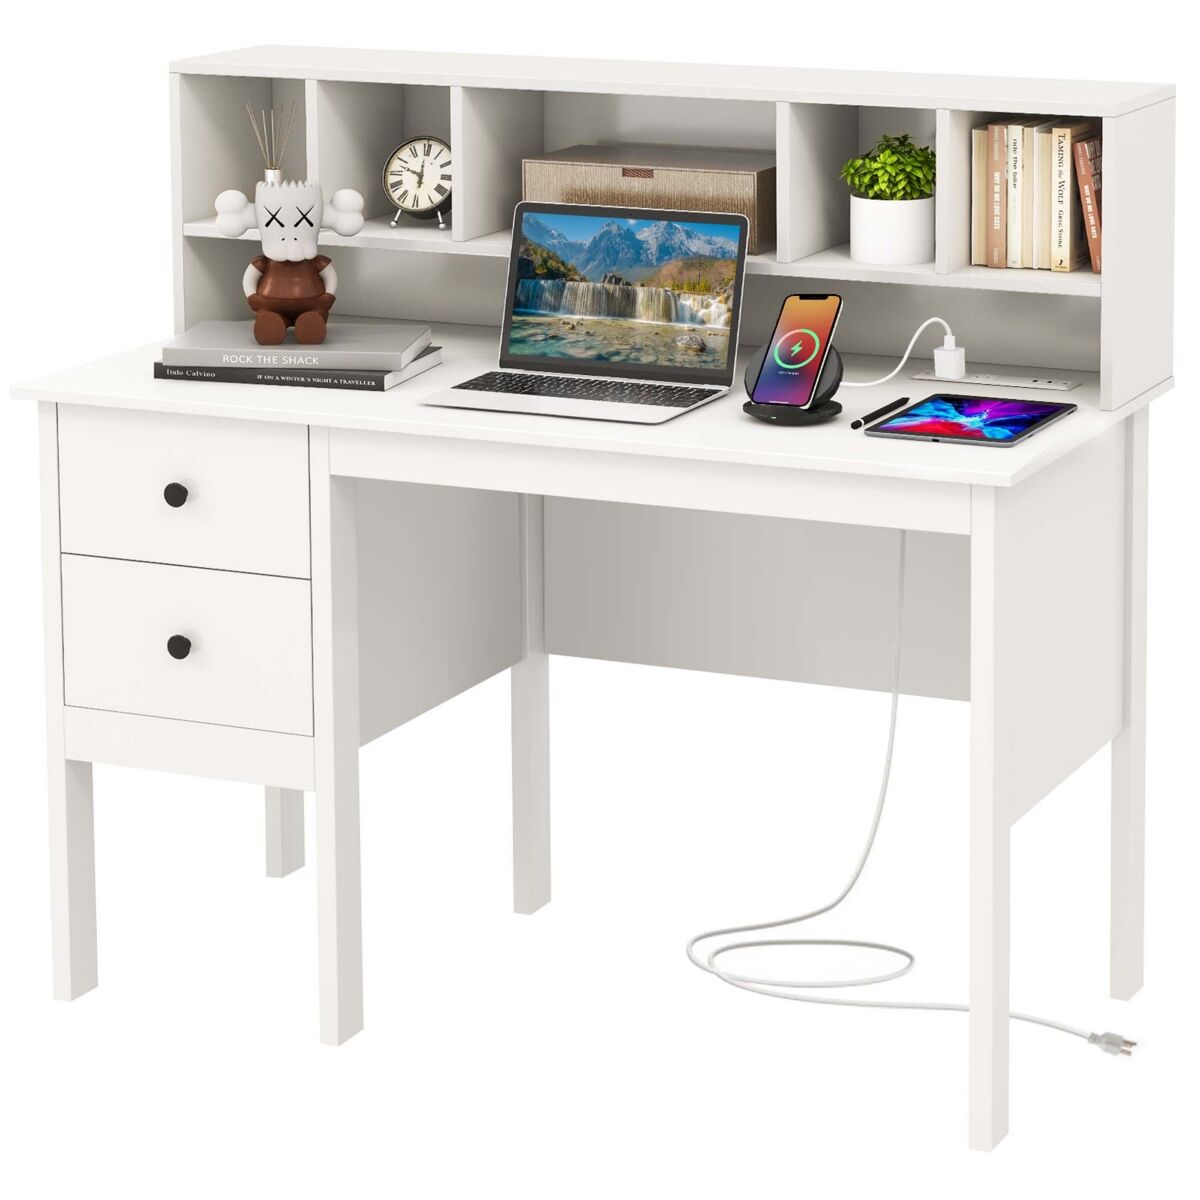 Costway Computer Desk Home Office Workstation Laptop Table - White